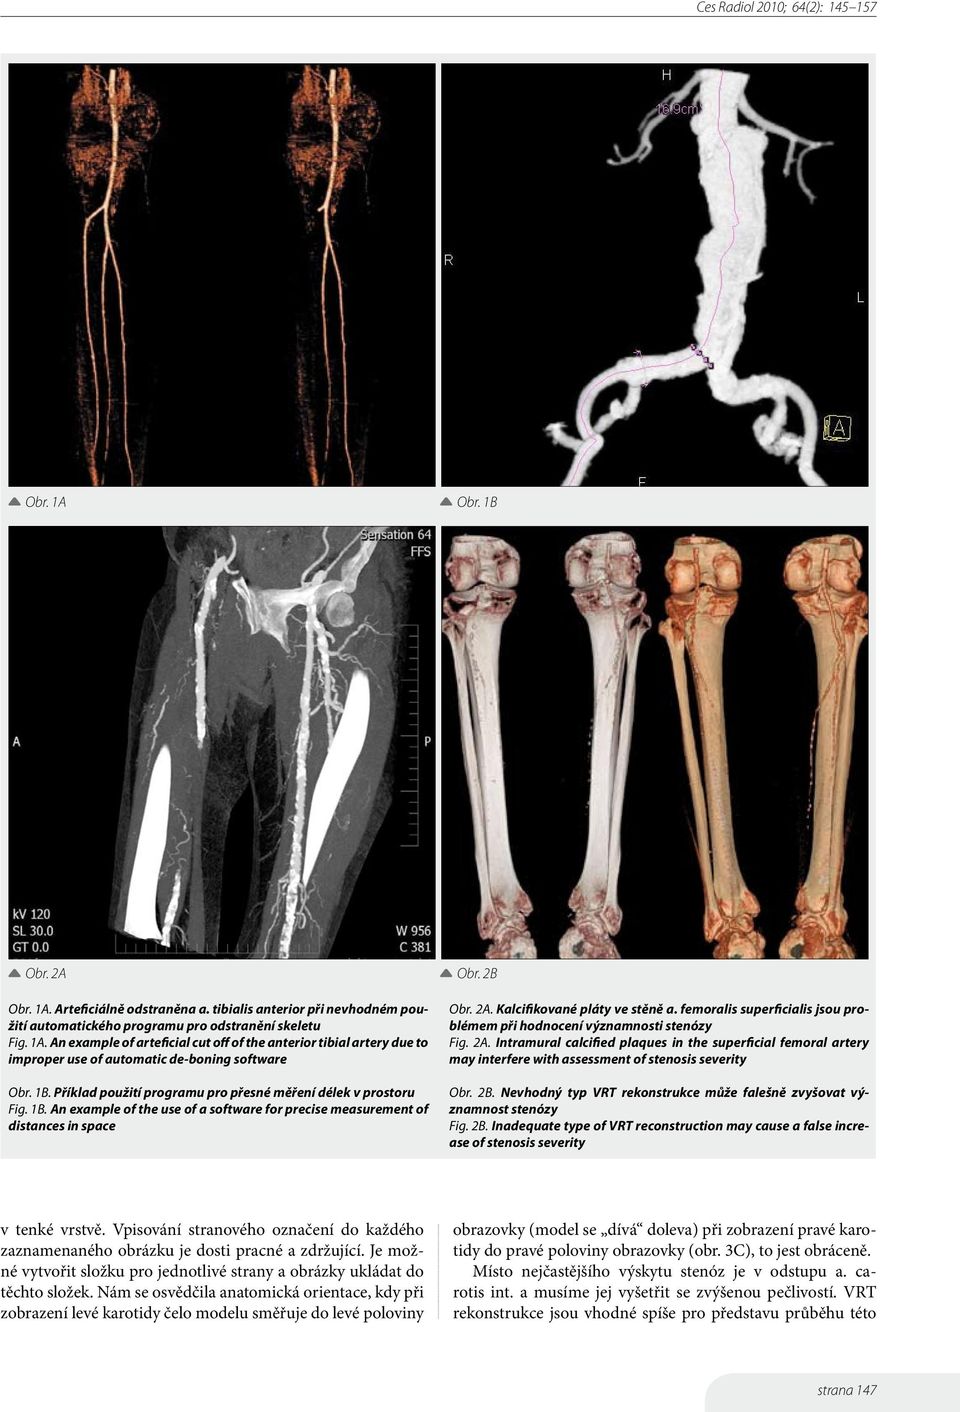 femoralis superficialis jsou problémem při hodnocení významnosti stenózy Fig. 2A. Intramural calcified plaques in the superficial femoral artery may interfere with assessment of stenosis severity Obr.